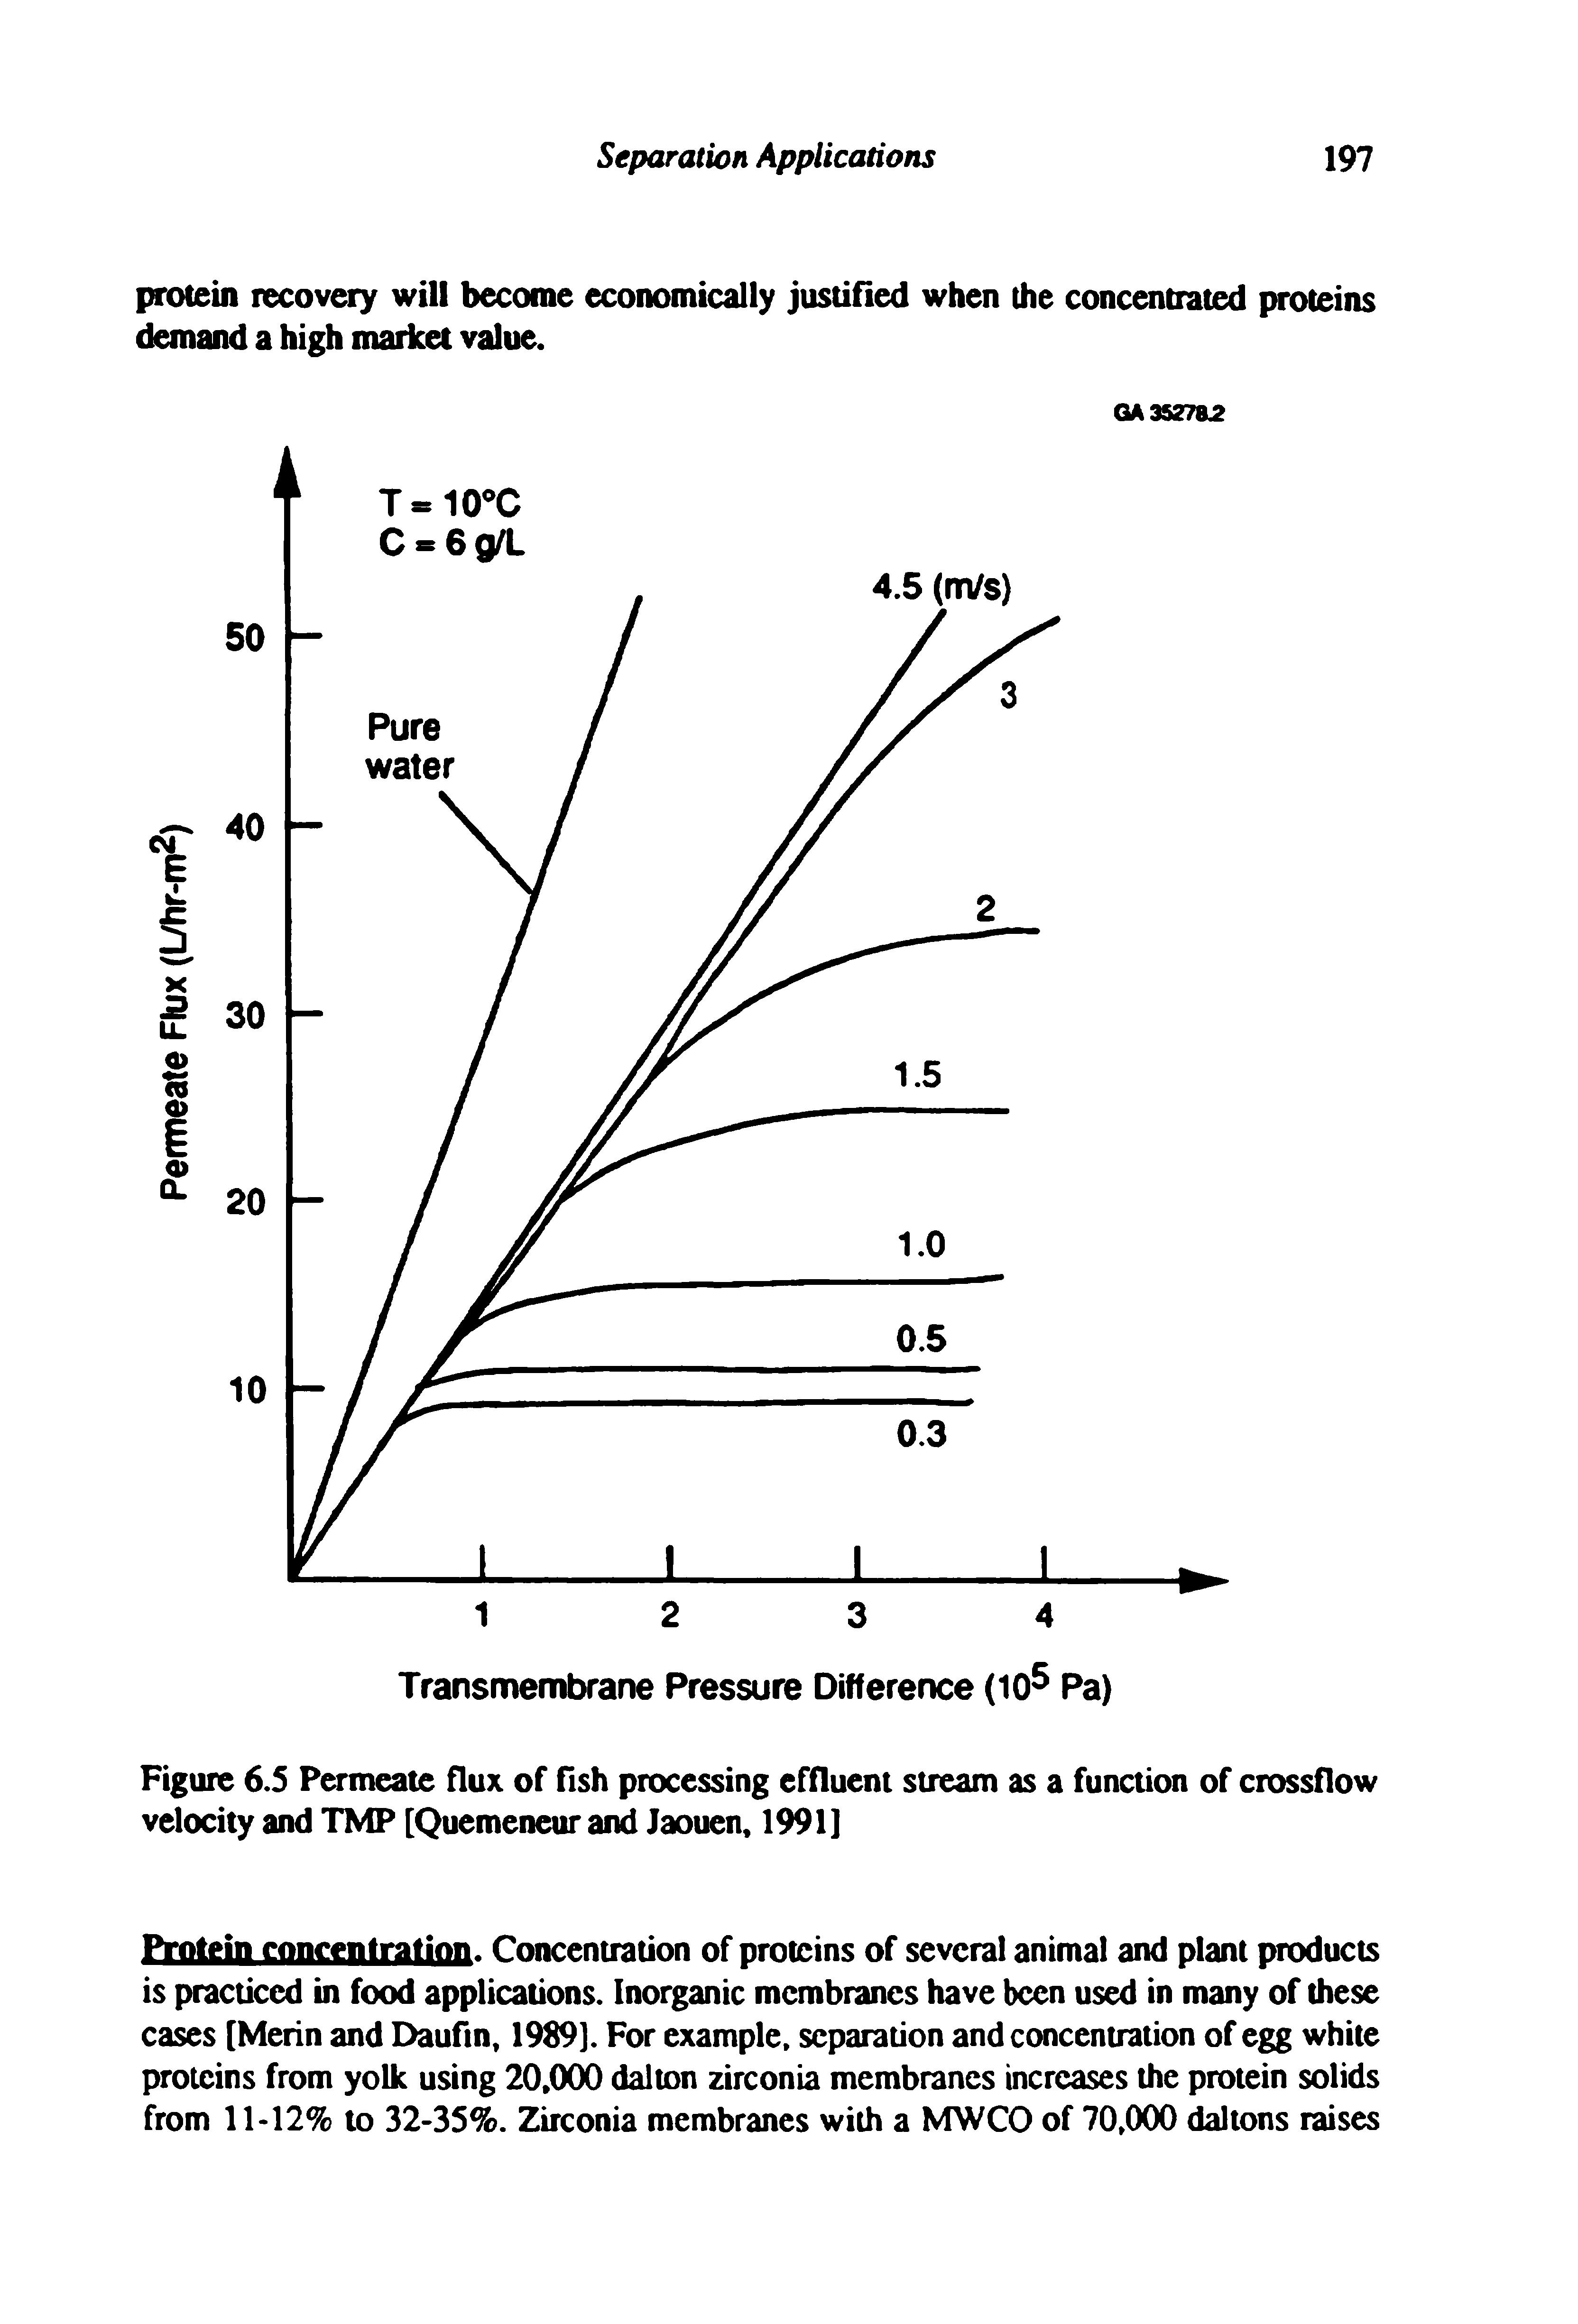 Figure 6.5 Permeate flux of Osh processing effluent sueam as a function of crossflow velocity and TMP [Quemeneur and Jaouen, 1991]...